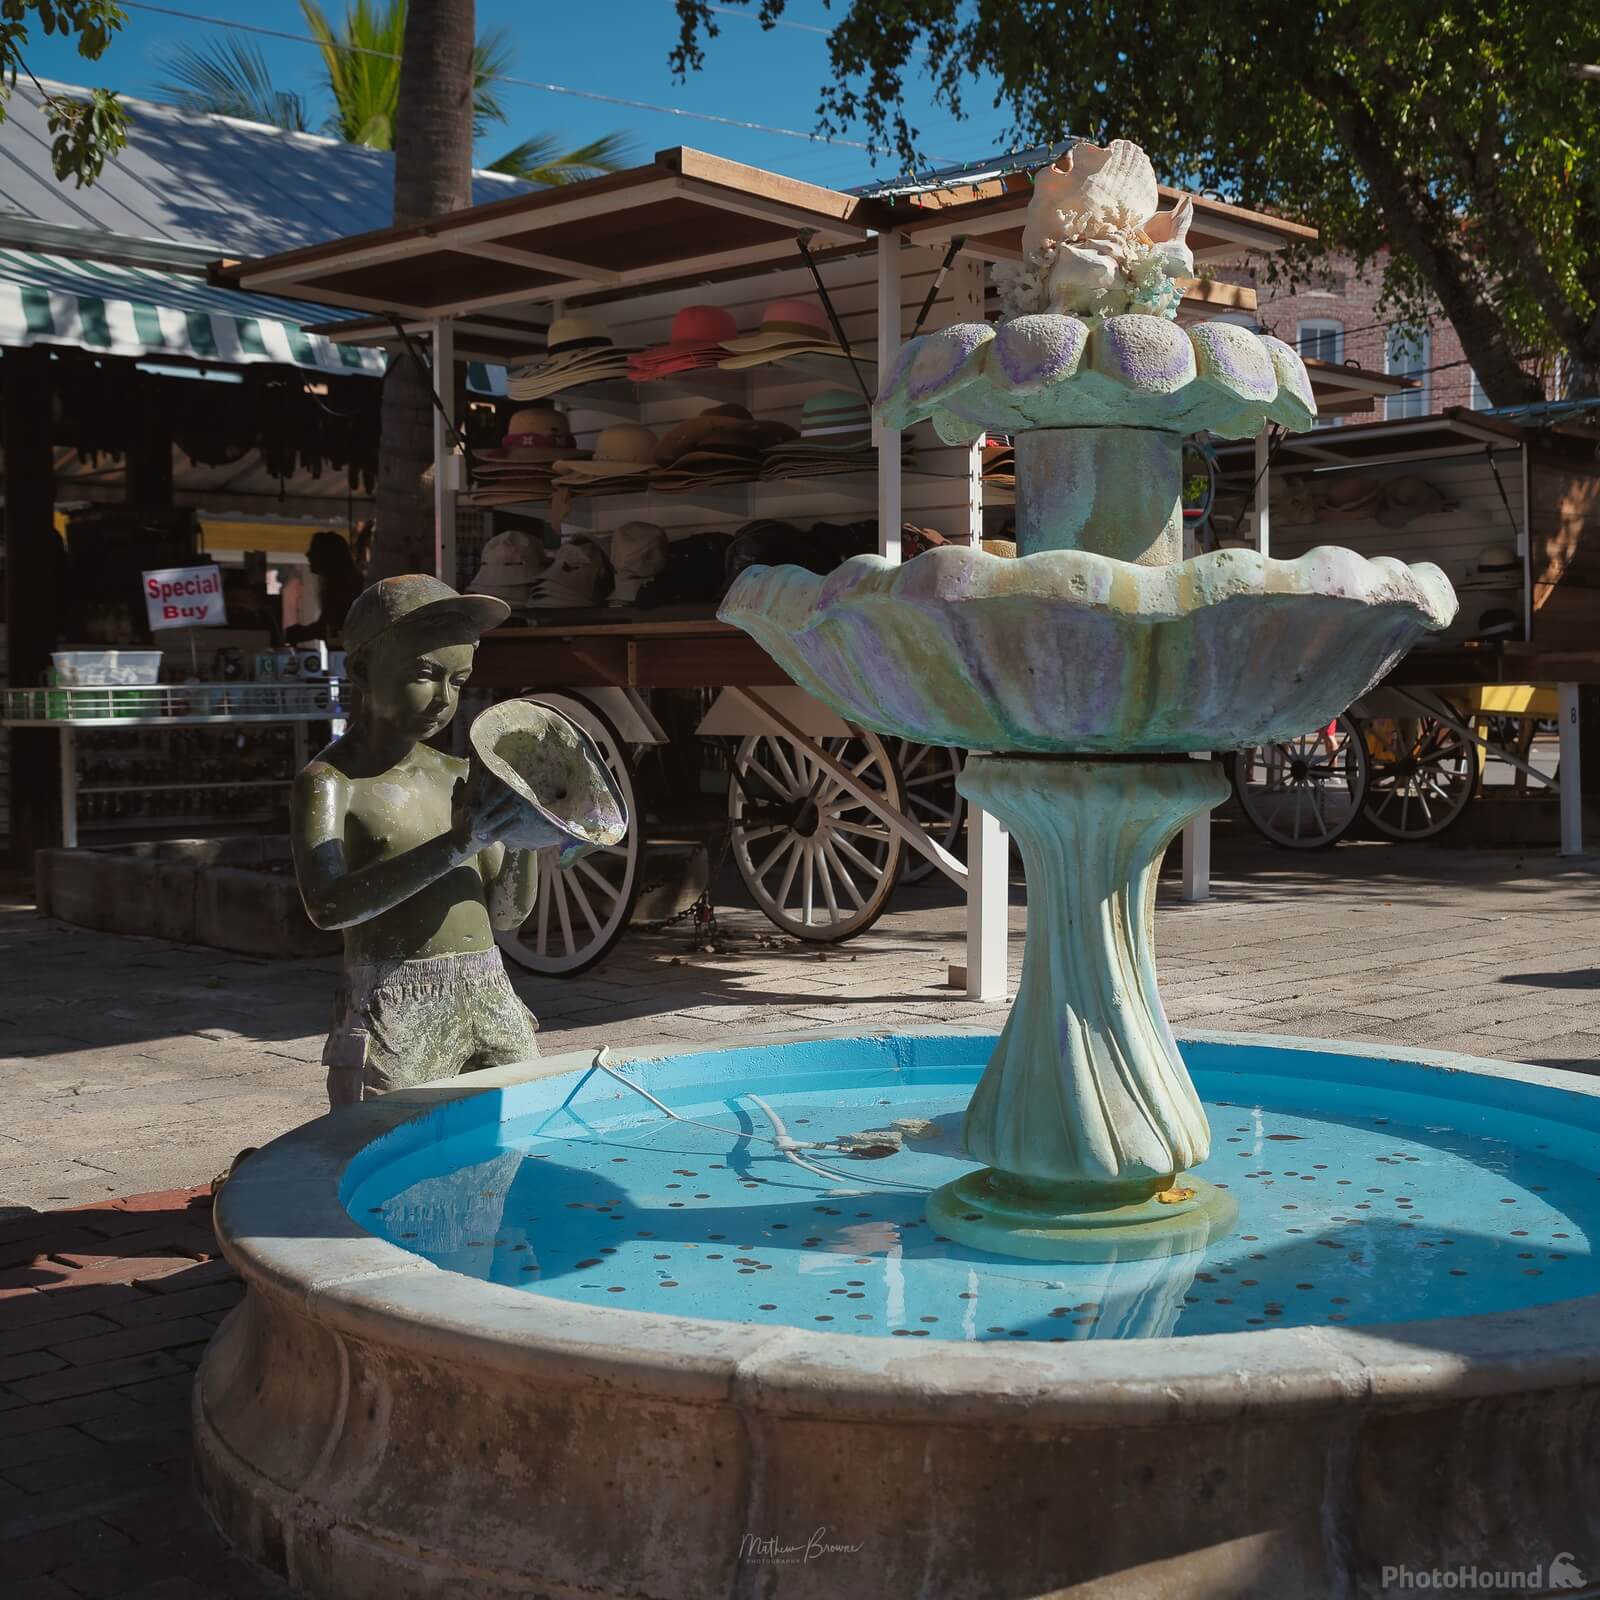 Image of Key West Mallory Square by Mathew Browne